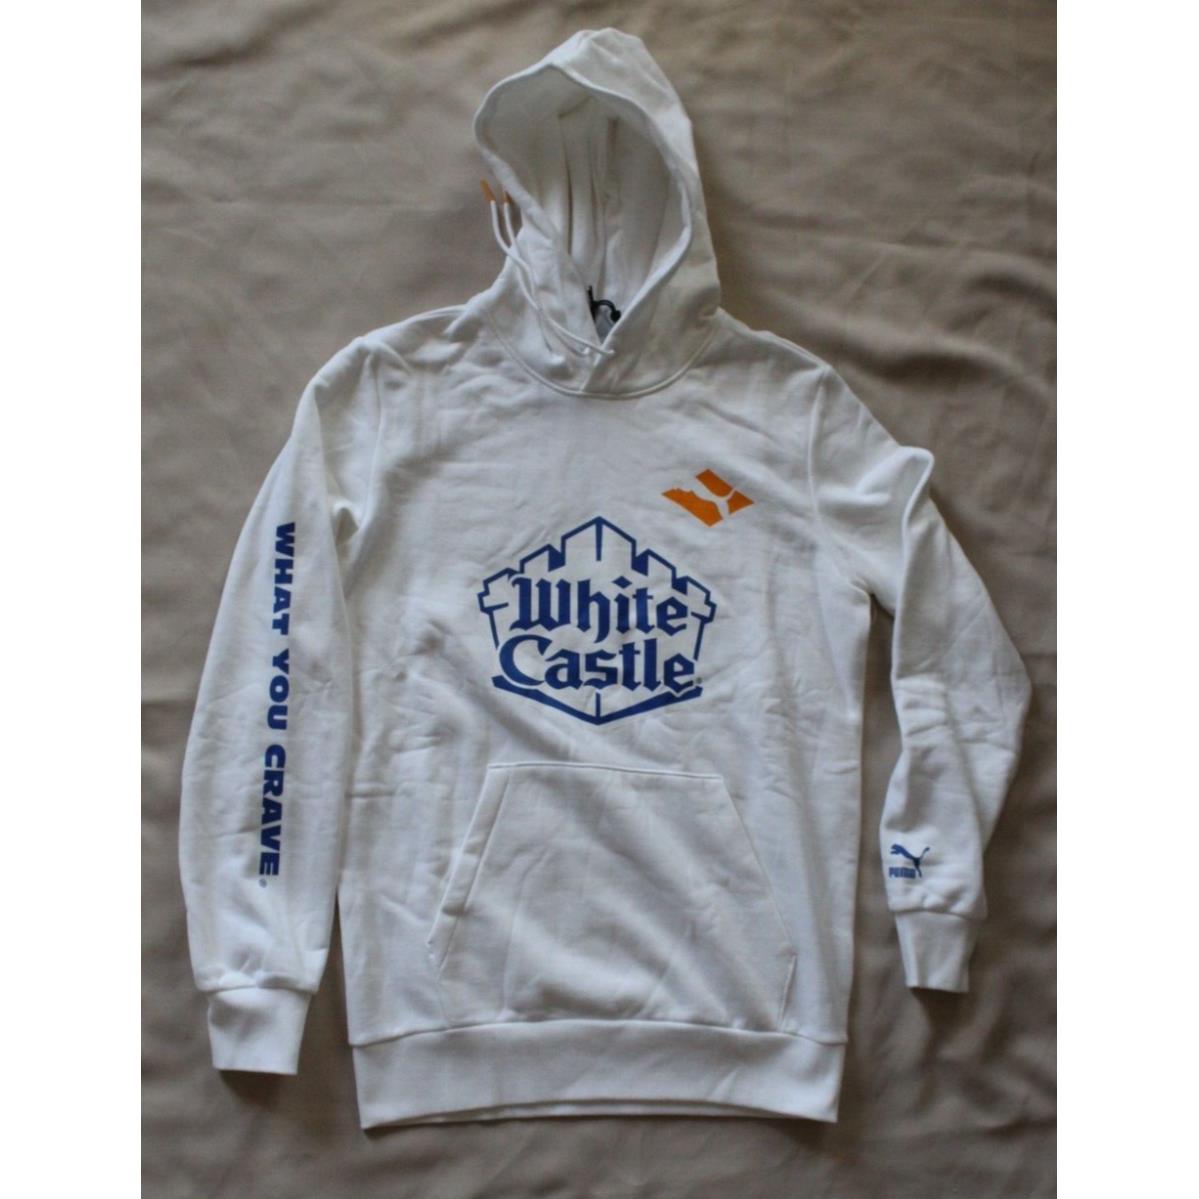 Puma X White Castle Hoody Sweater Hoodie Mens Sz S What You Crave 100 Year Anniv